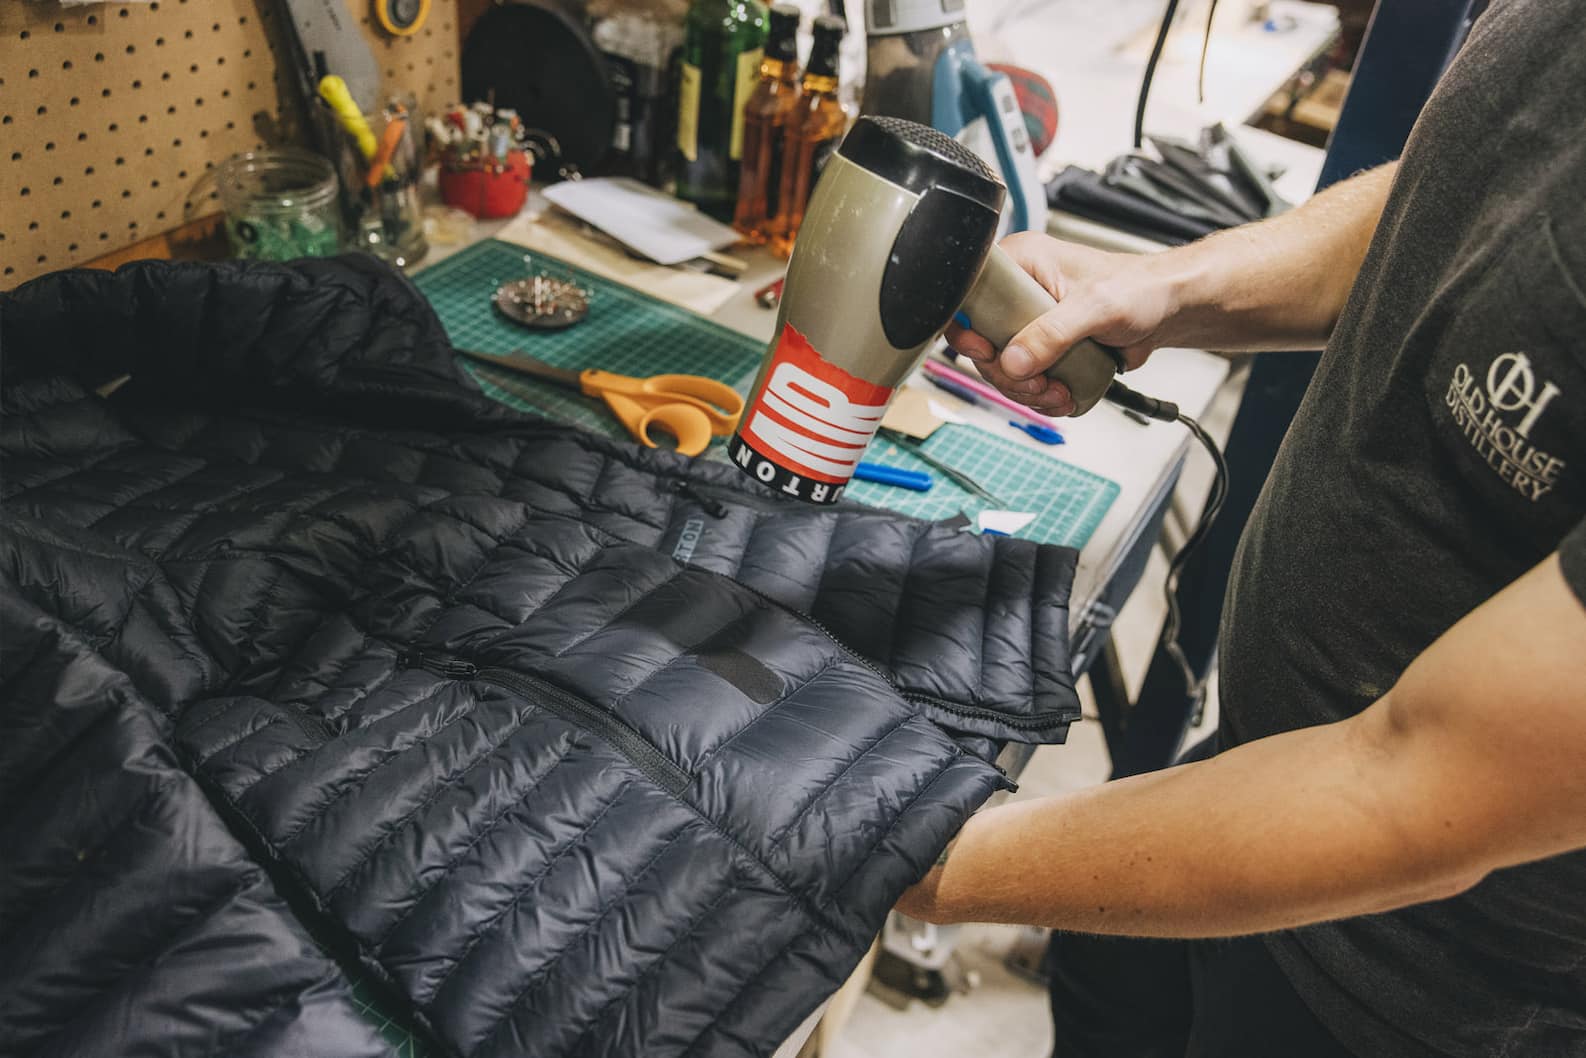 How to Patch Up a Puffer Jacket